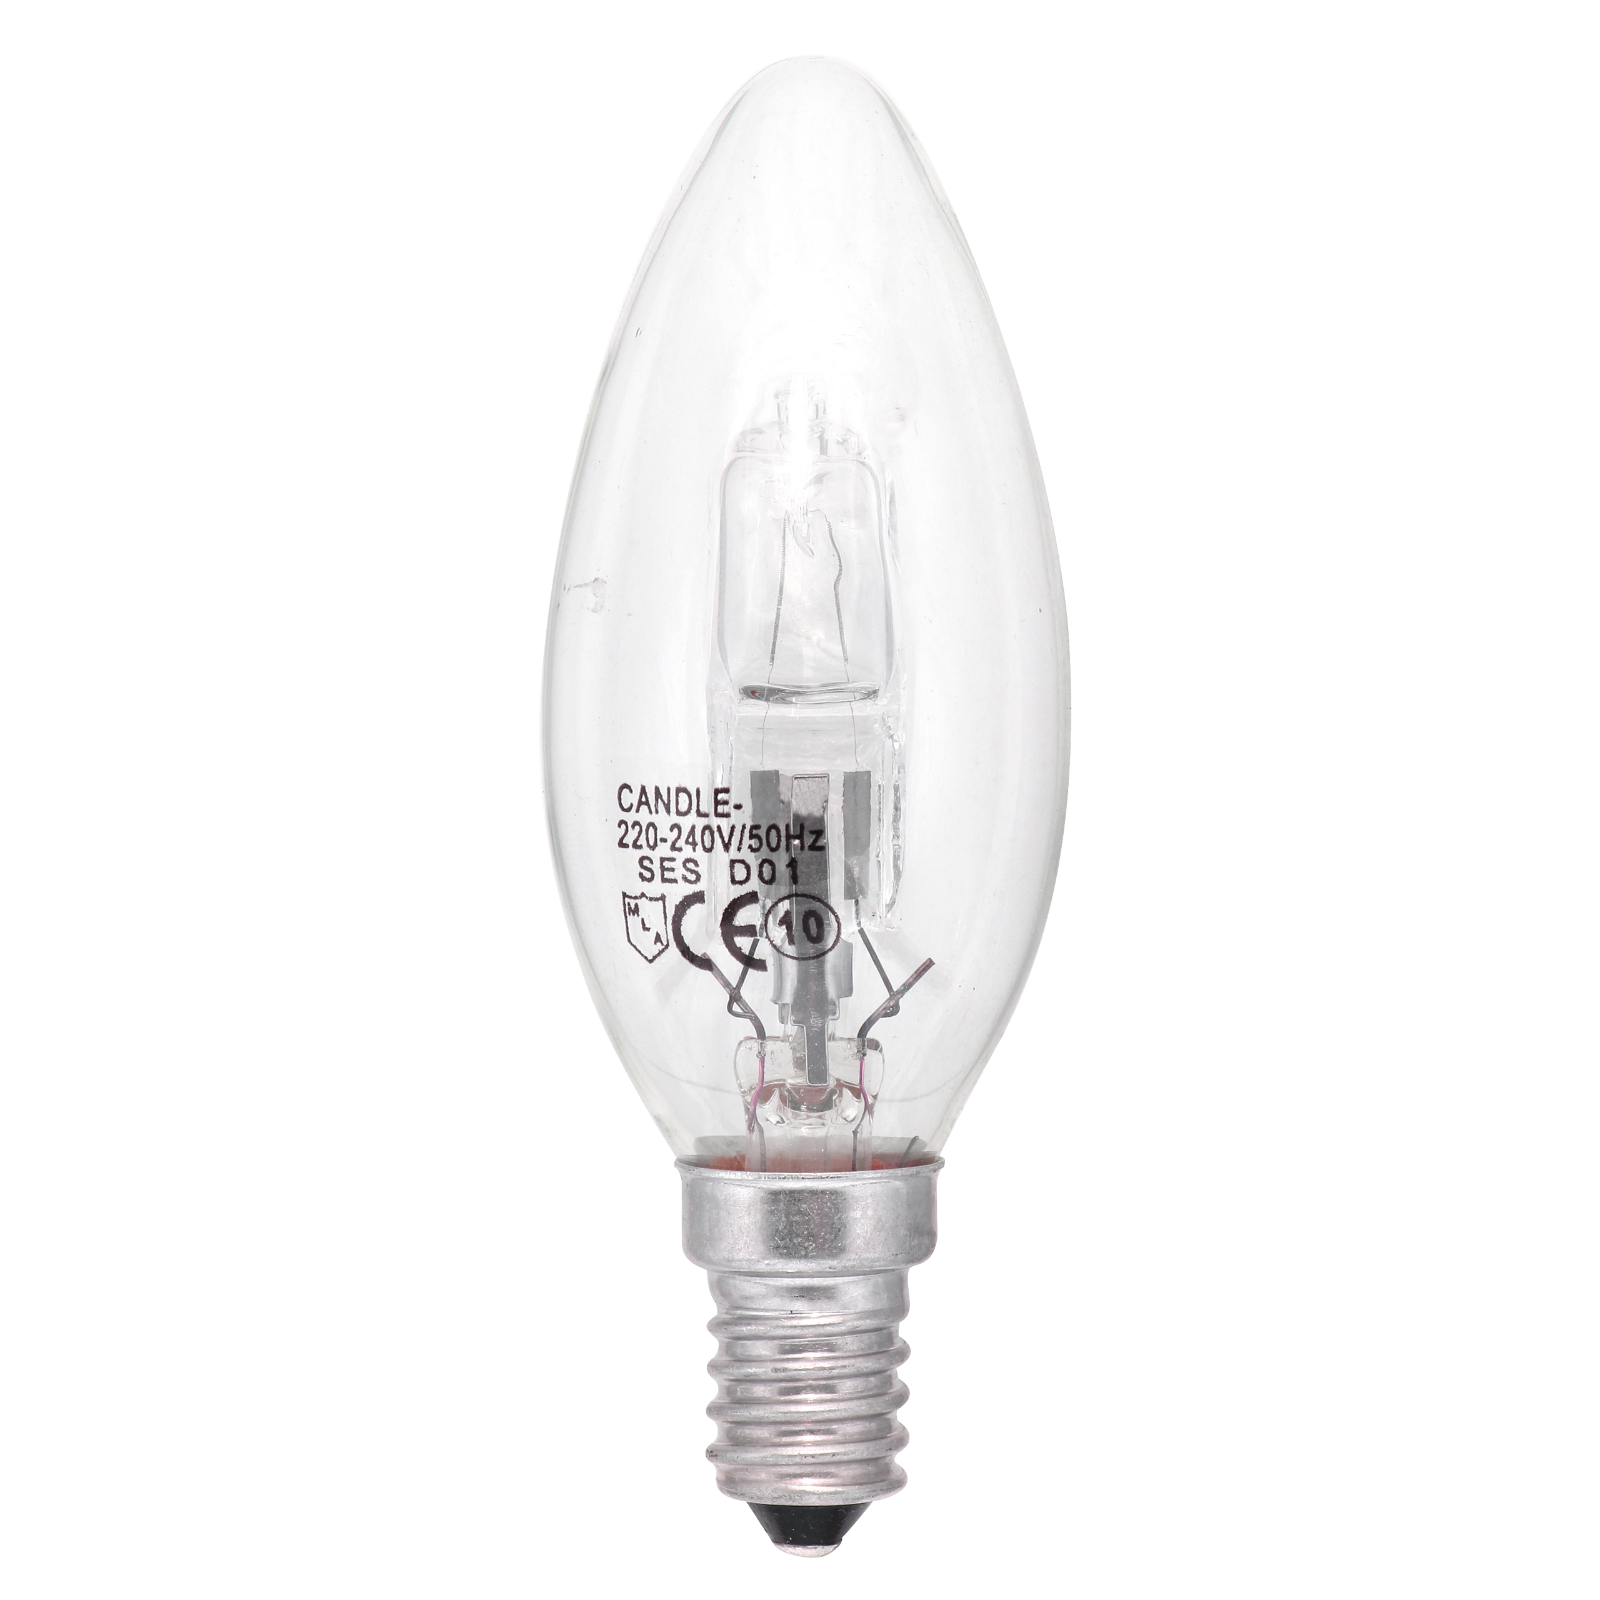 28W Halogen Energy Saving Clear Candle Lamp SES (equivalent To 40W) - HALO-C28SES - SOLD-OUT!! 